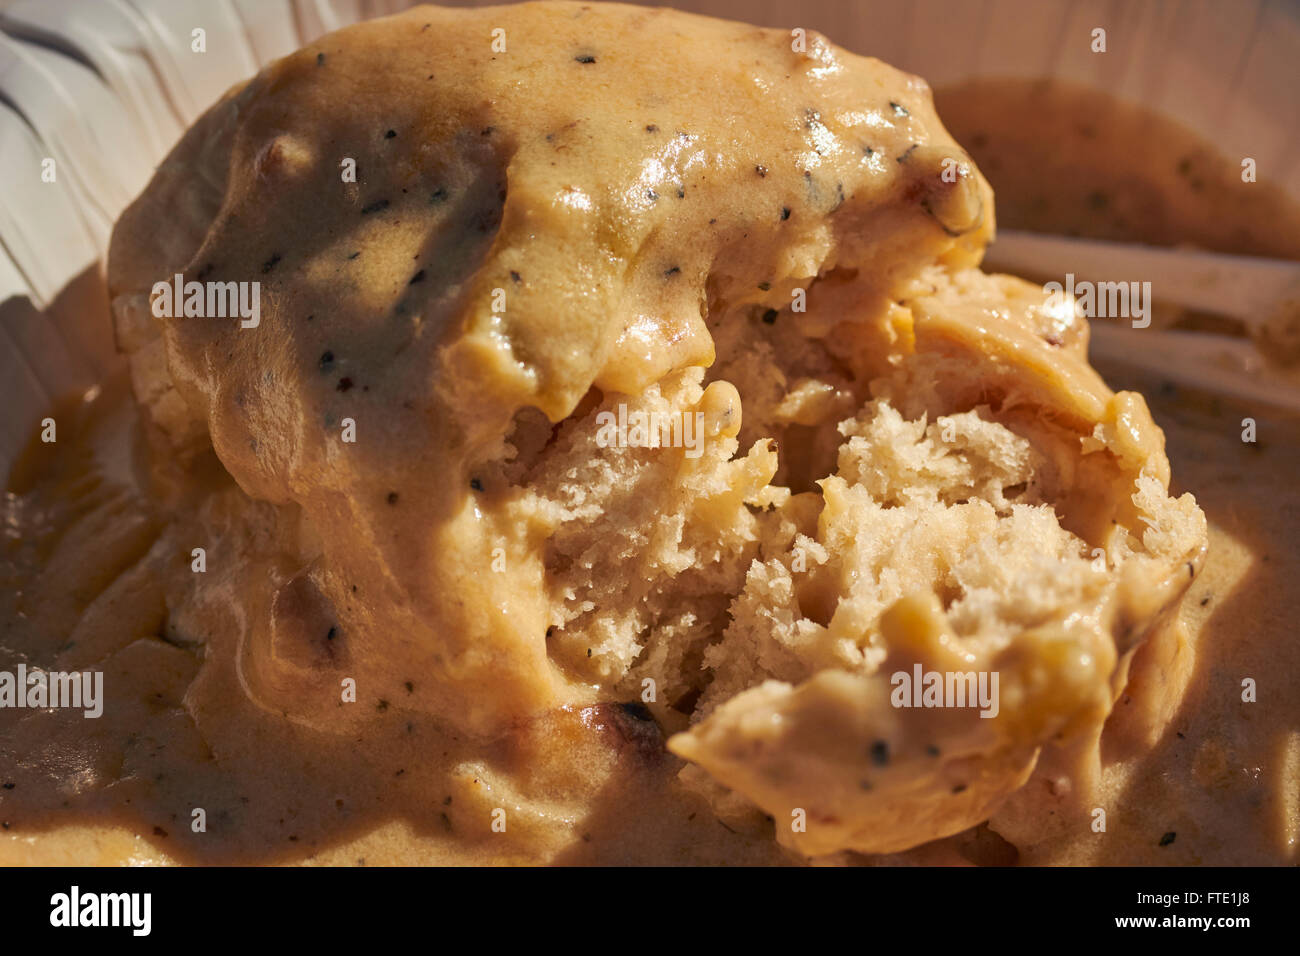 Chuckwagon or Cowboy style biscuit and sawmill gravy, Alpine, Texas, USA Stock Photo